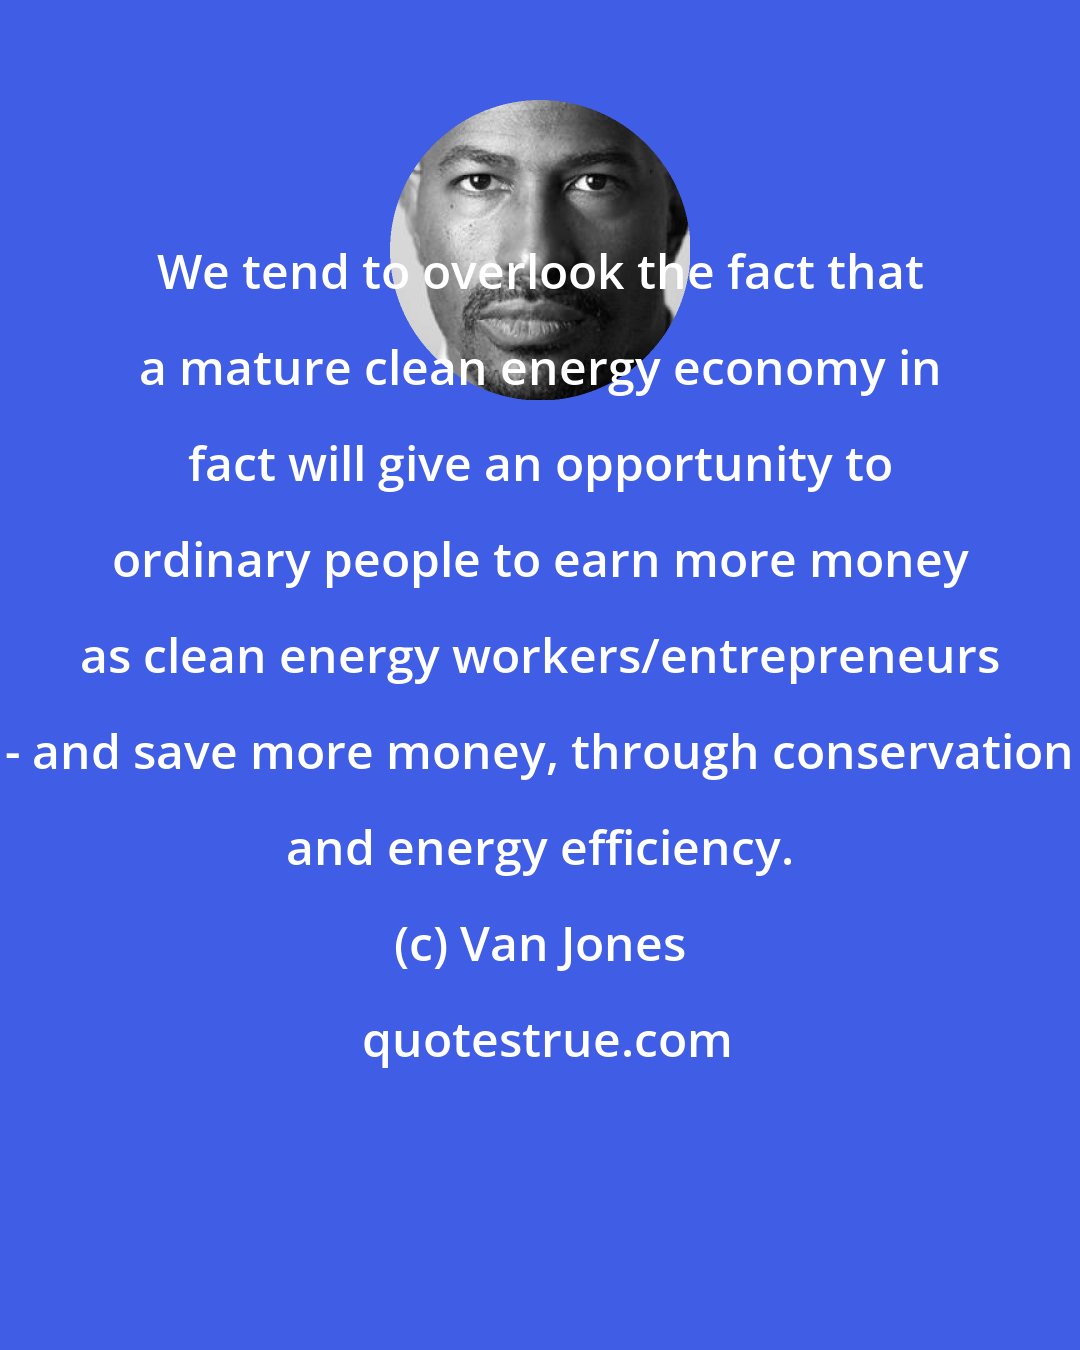 Van Jones: We tend to overlook the fact that a mature clean energy economy in fact will give an opportunity to ordinary people to earn more money as clean energy workers/entrepreneurs - and save more money, through conservation and energy efficiency.